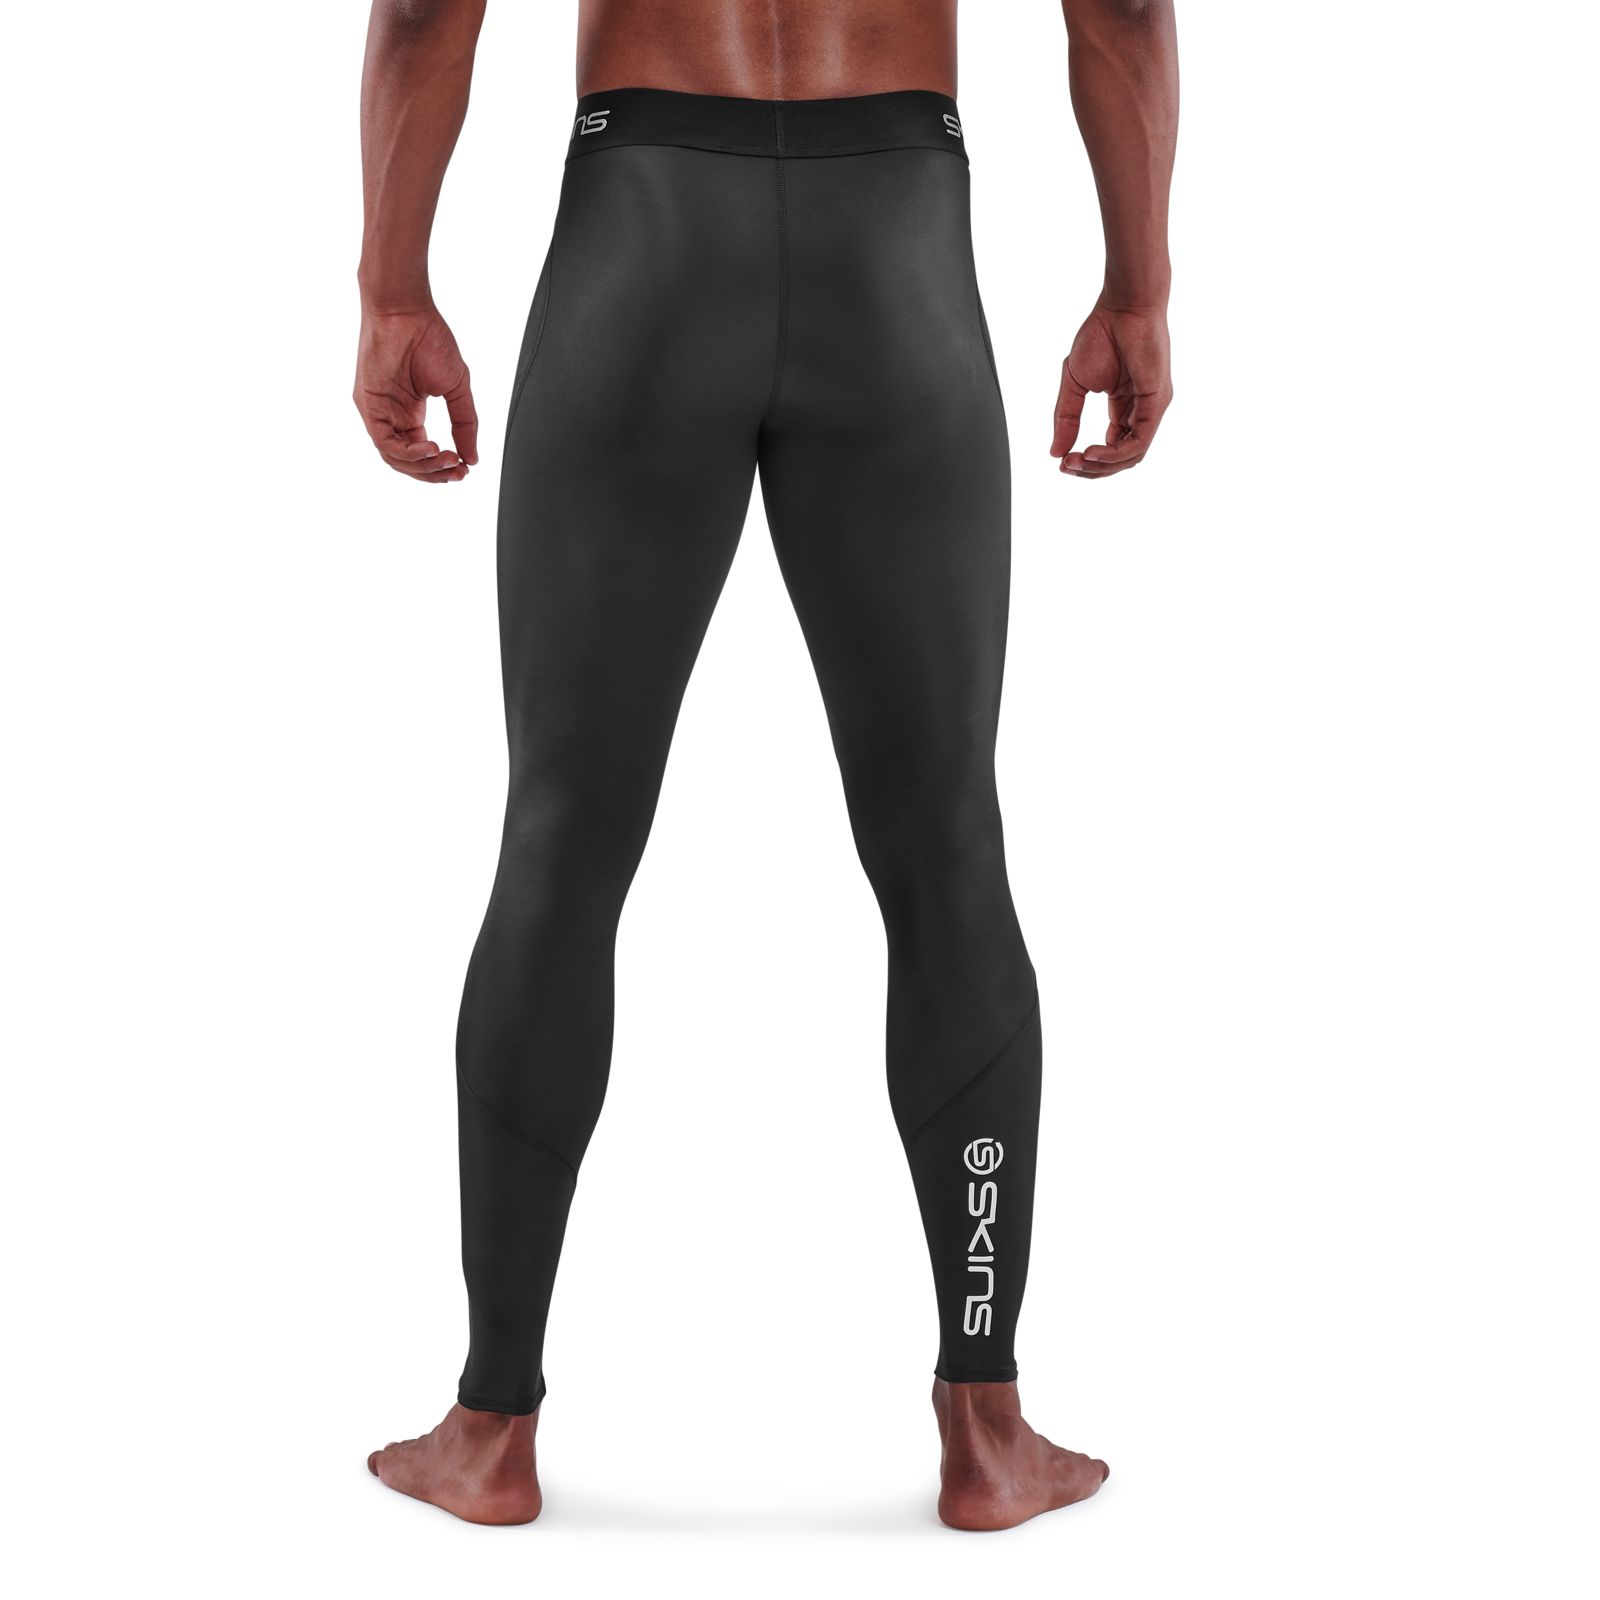 Skins Travel and Recovery Compression Tights in Black with Blue Stitching  size ML